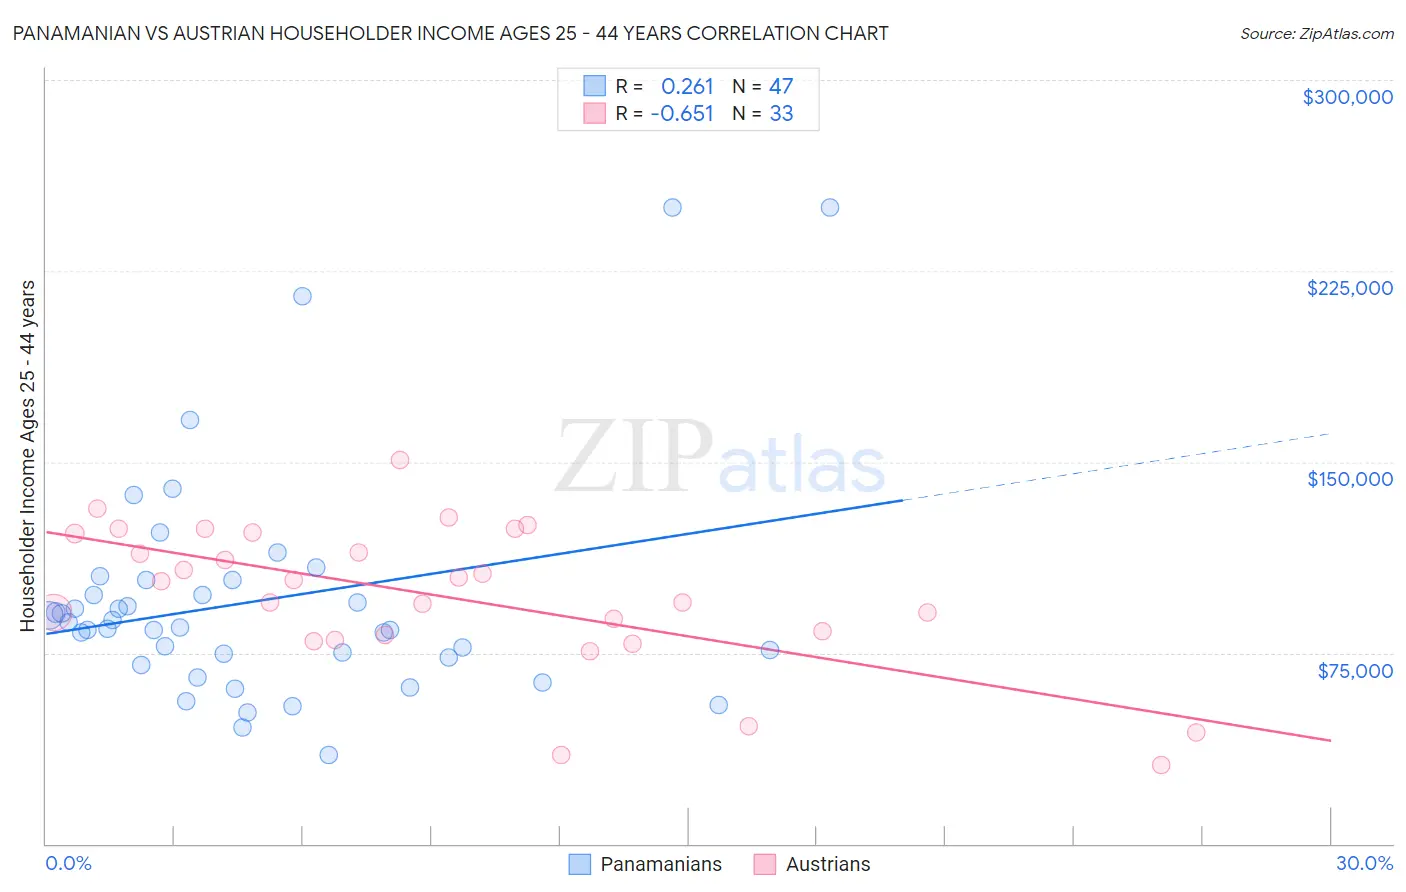 Panamanian vs Austrian Householder Income Ages 25 - 44 years